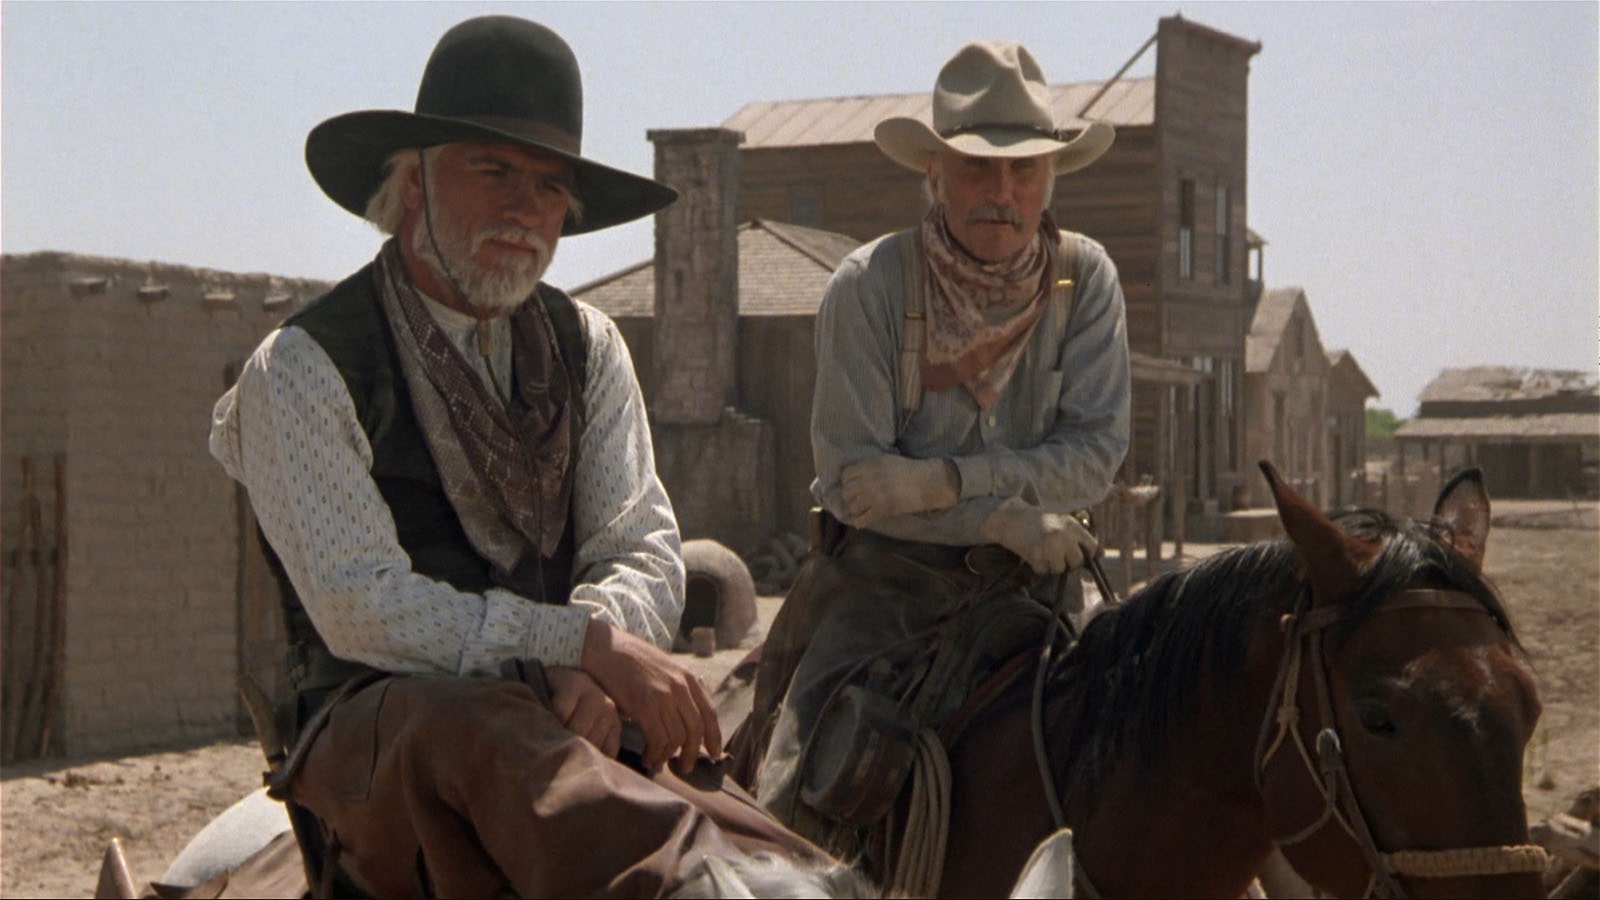 A scene from the TV Western "Lonesome Dove," at left, Tommy Lee Jones is seen wearing an unmodified Boss of the Plains or open-crease look. At right, Robert Duvall sports the peaked crown silver belly Montana look now known as the Gus.